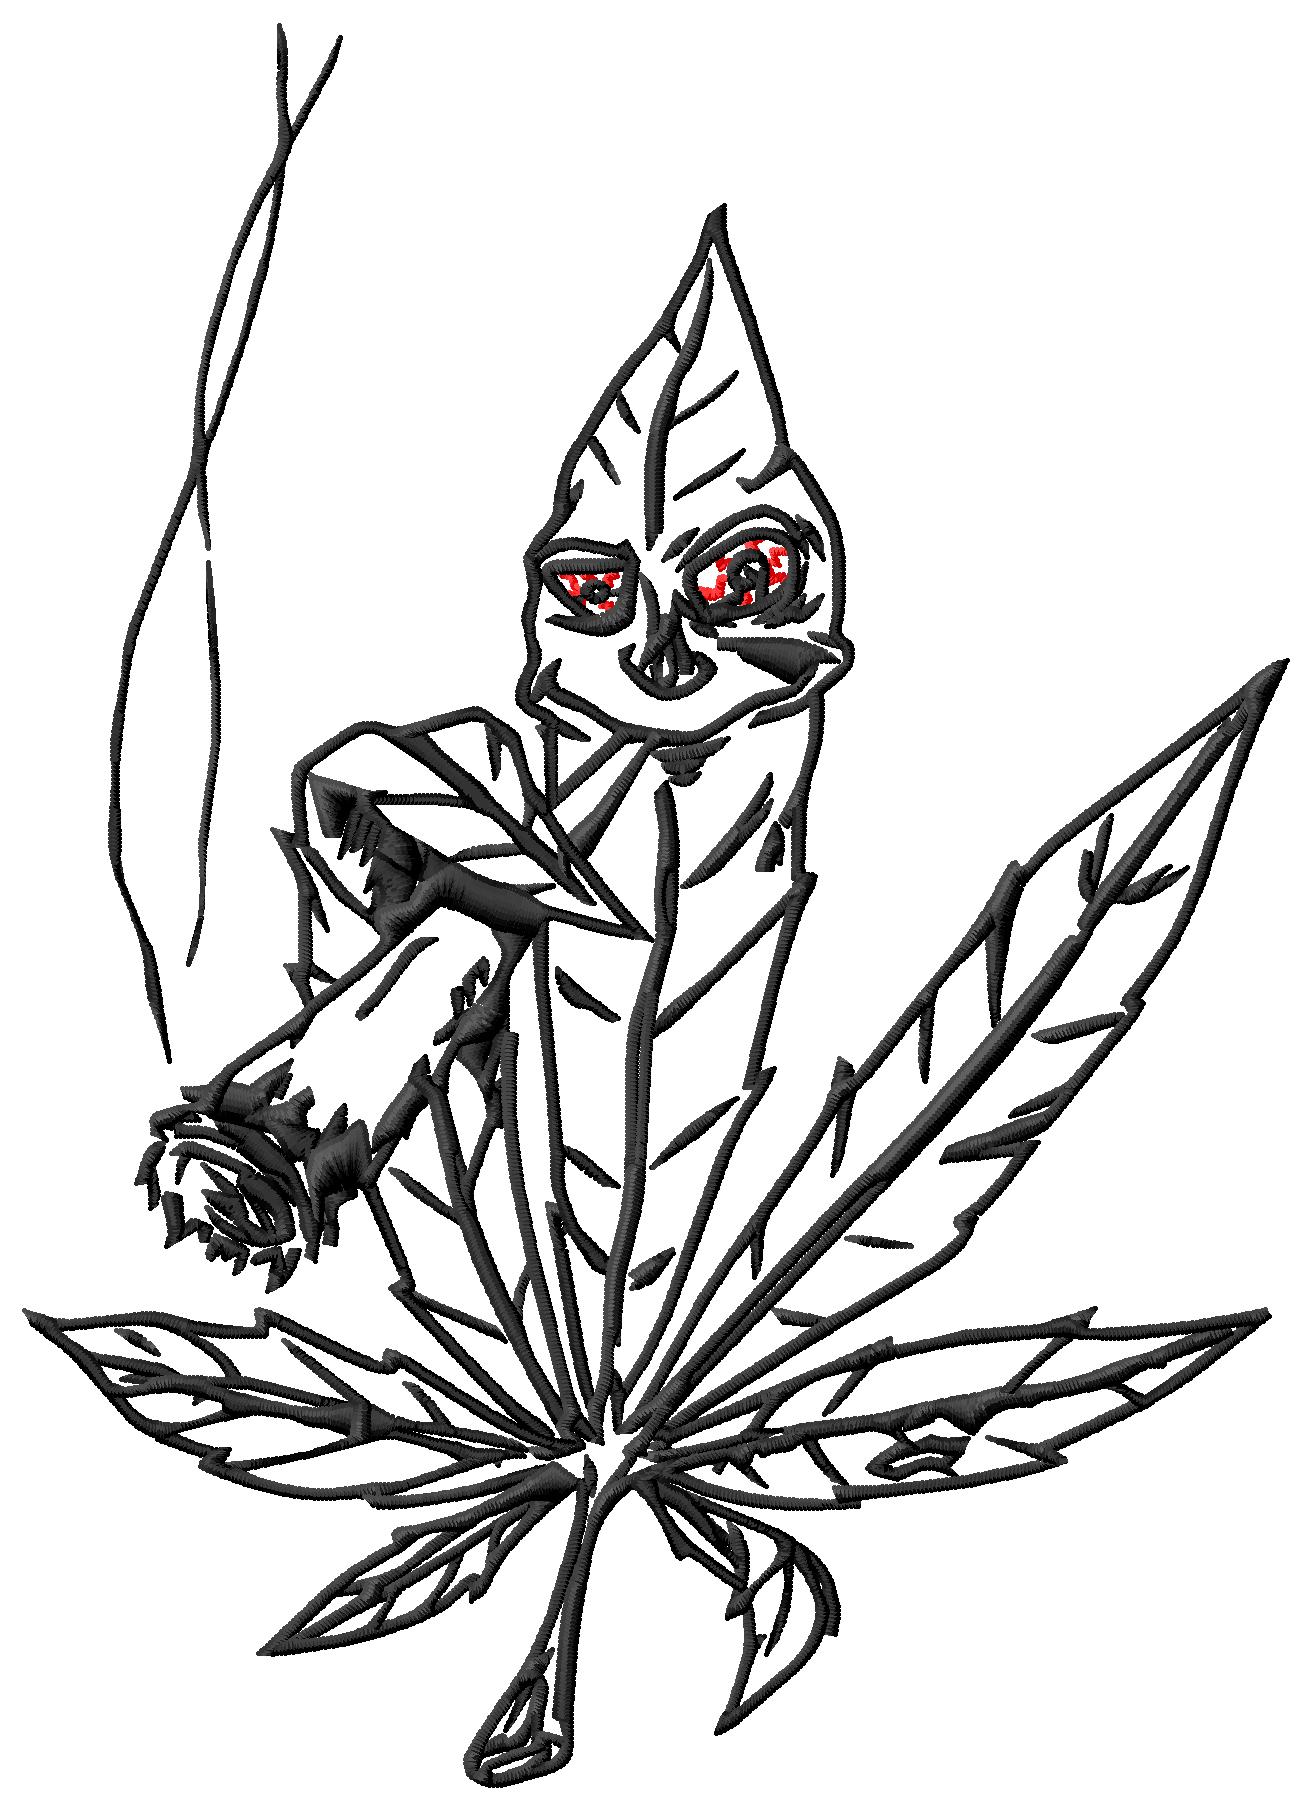 weed plant smoking a joint